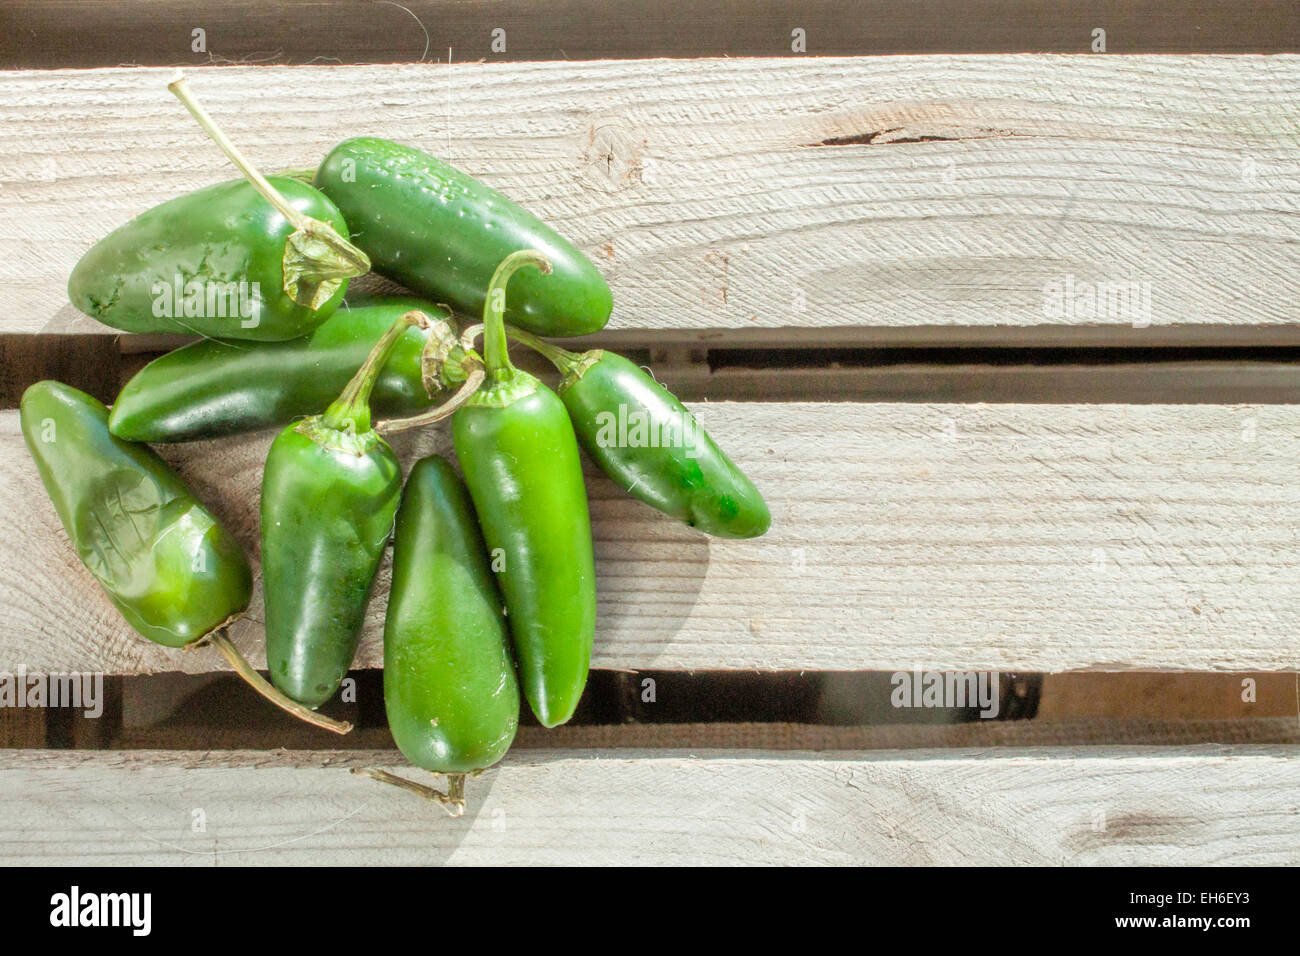 A lot of green jalapenos, on a wooden background Stock Photo